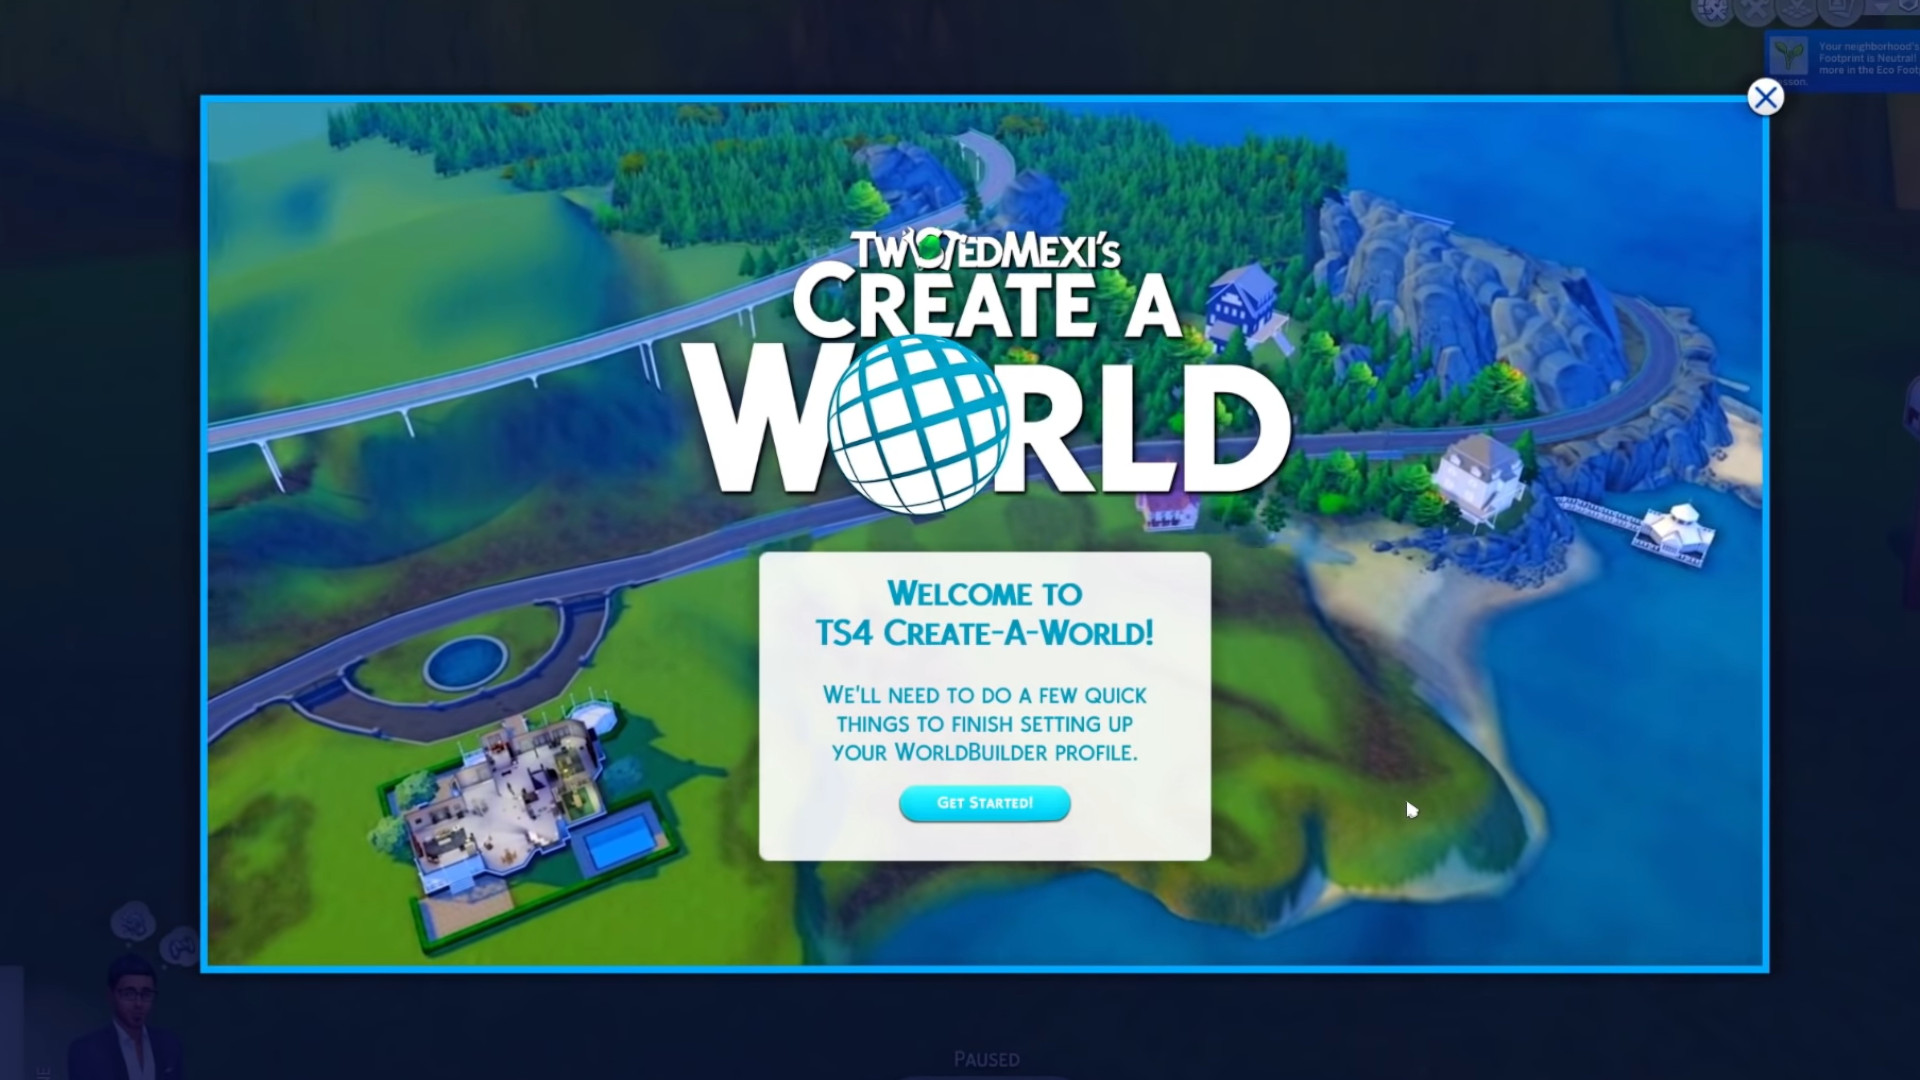 New World Notes: Finally, Anyone Can Access The Sims 4 Create-A-Sim Demo